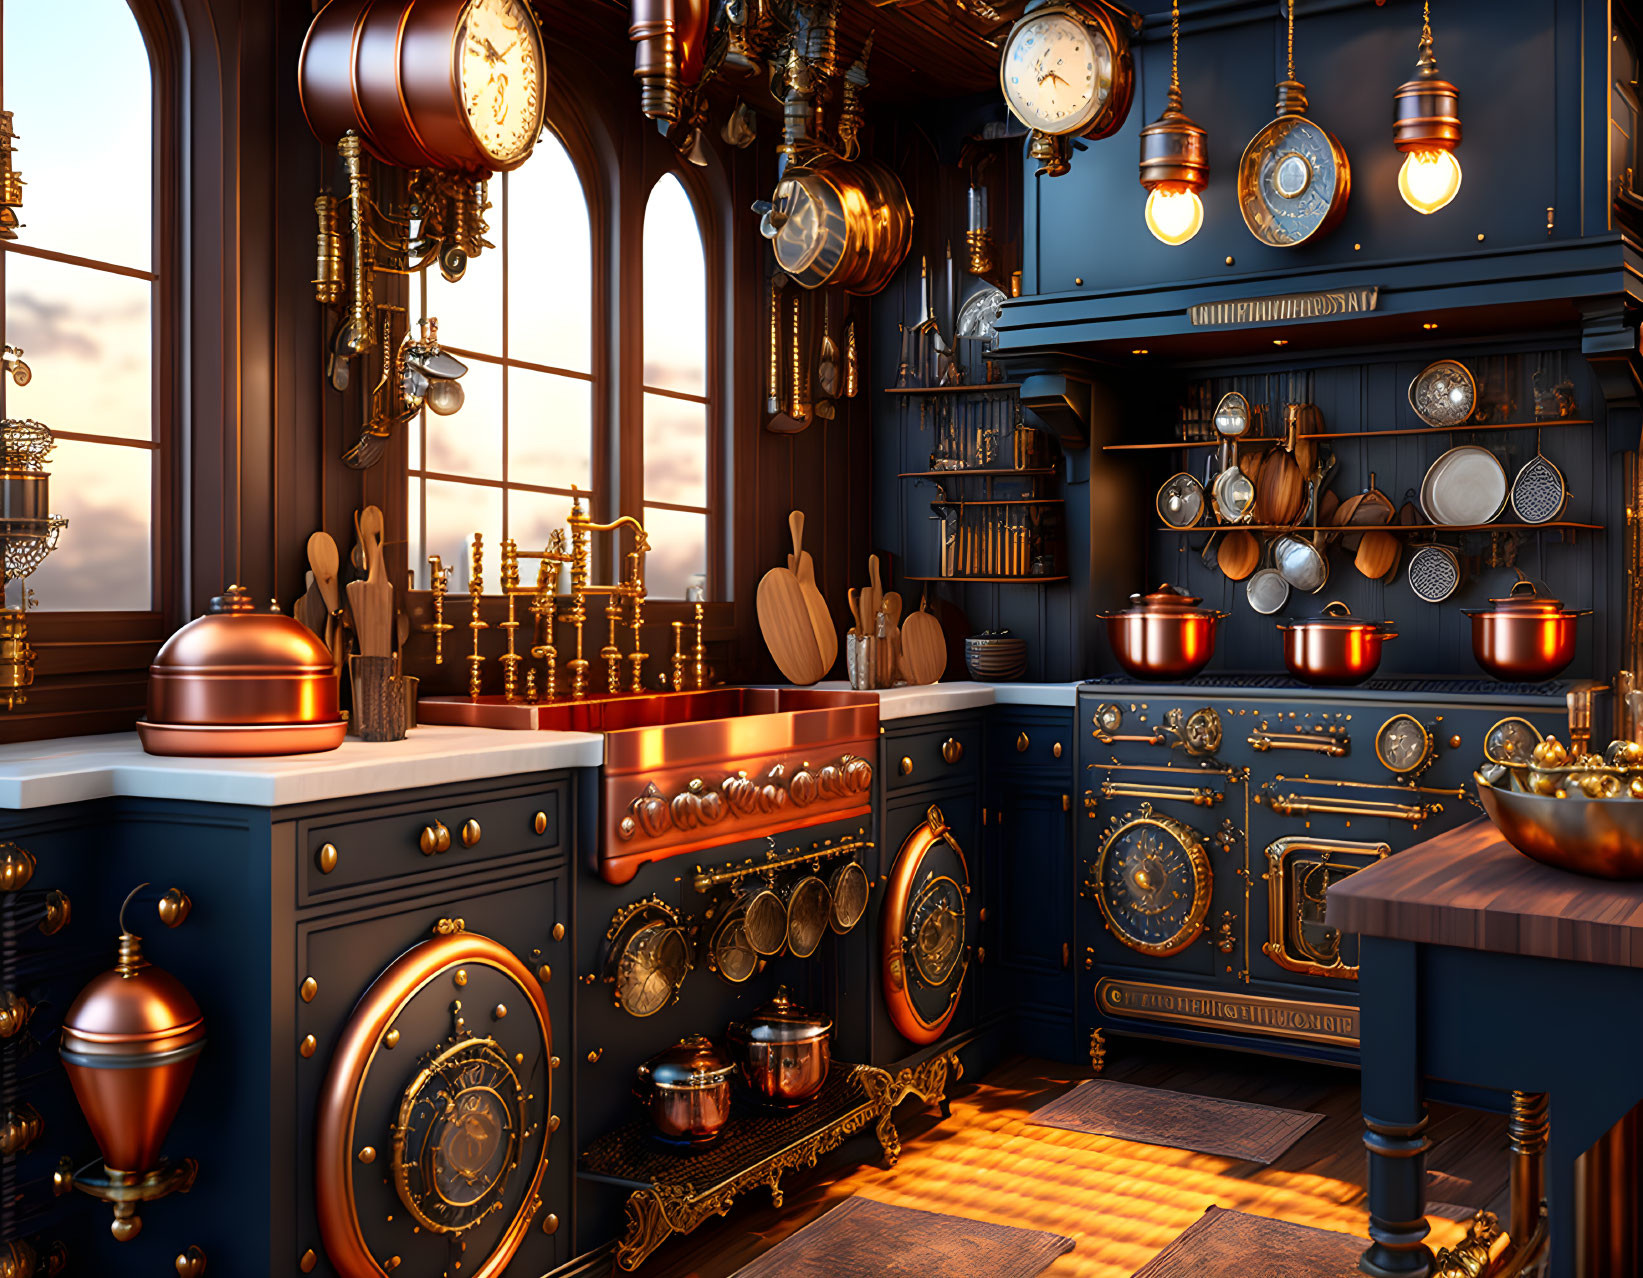 Luxurious steampunk-style kitchen with copper utensils and vintage clocks